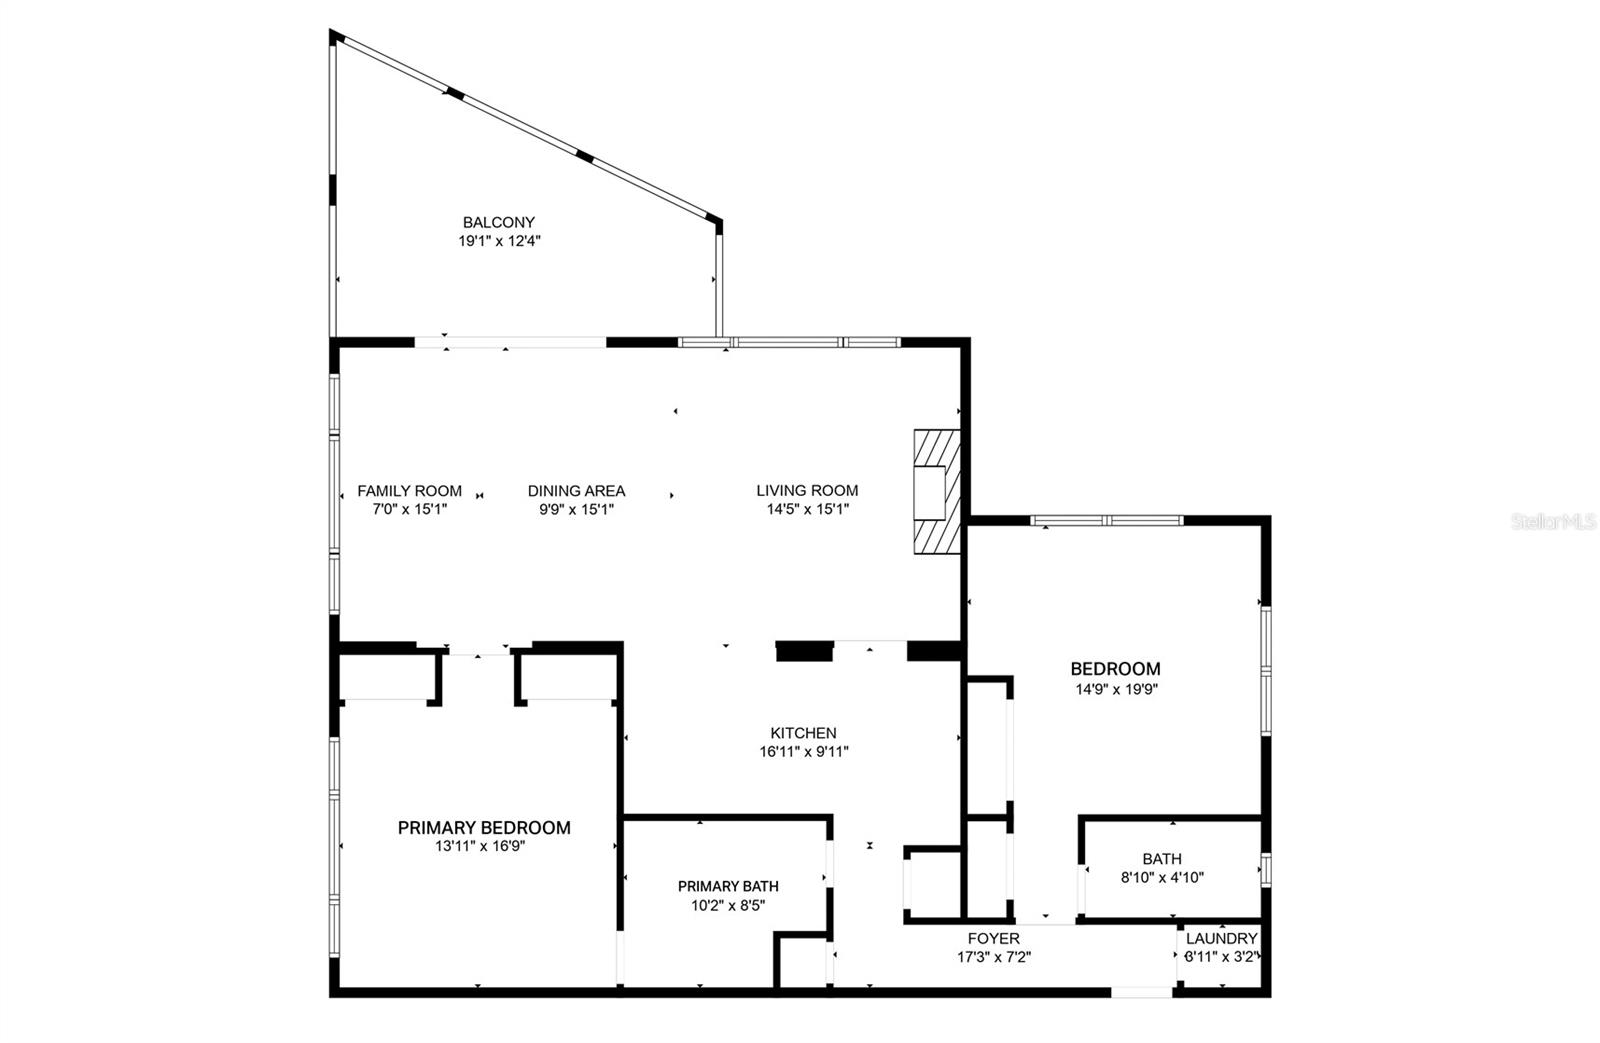 The clever floorplan maximizes the space and affords privacy with the bedroom configuration.